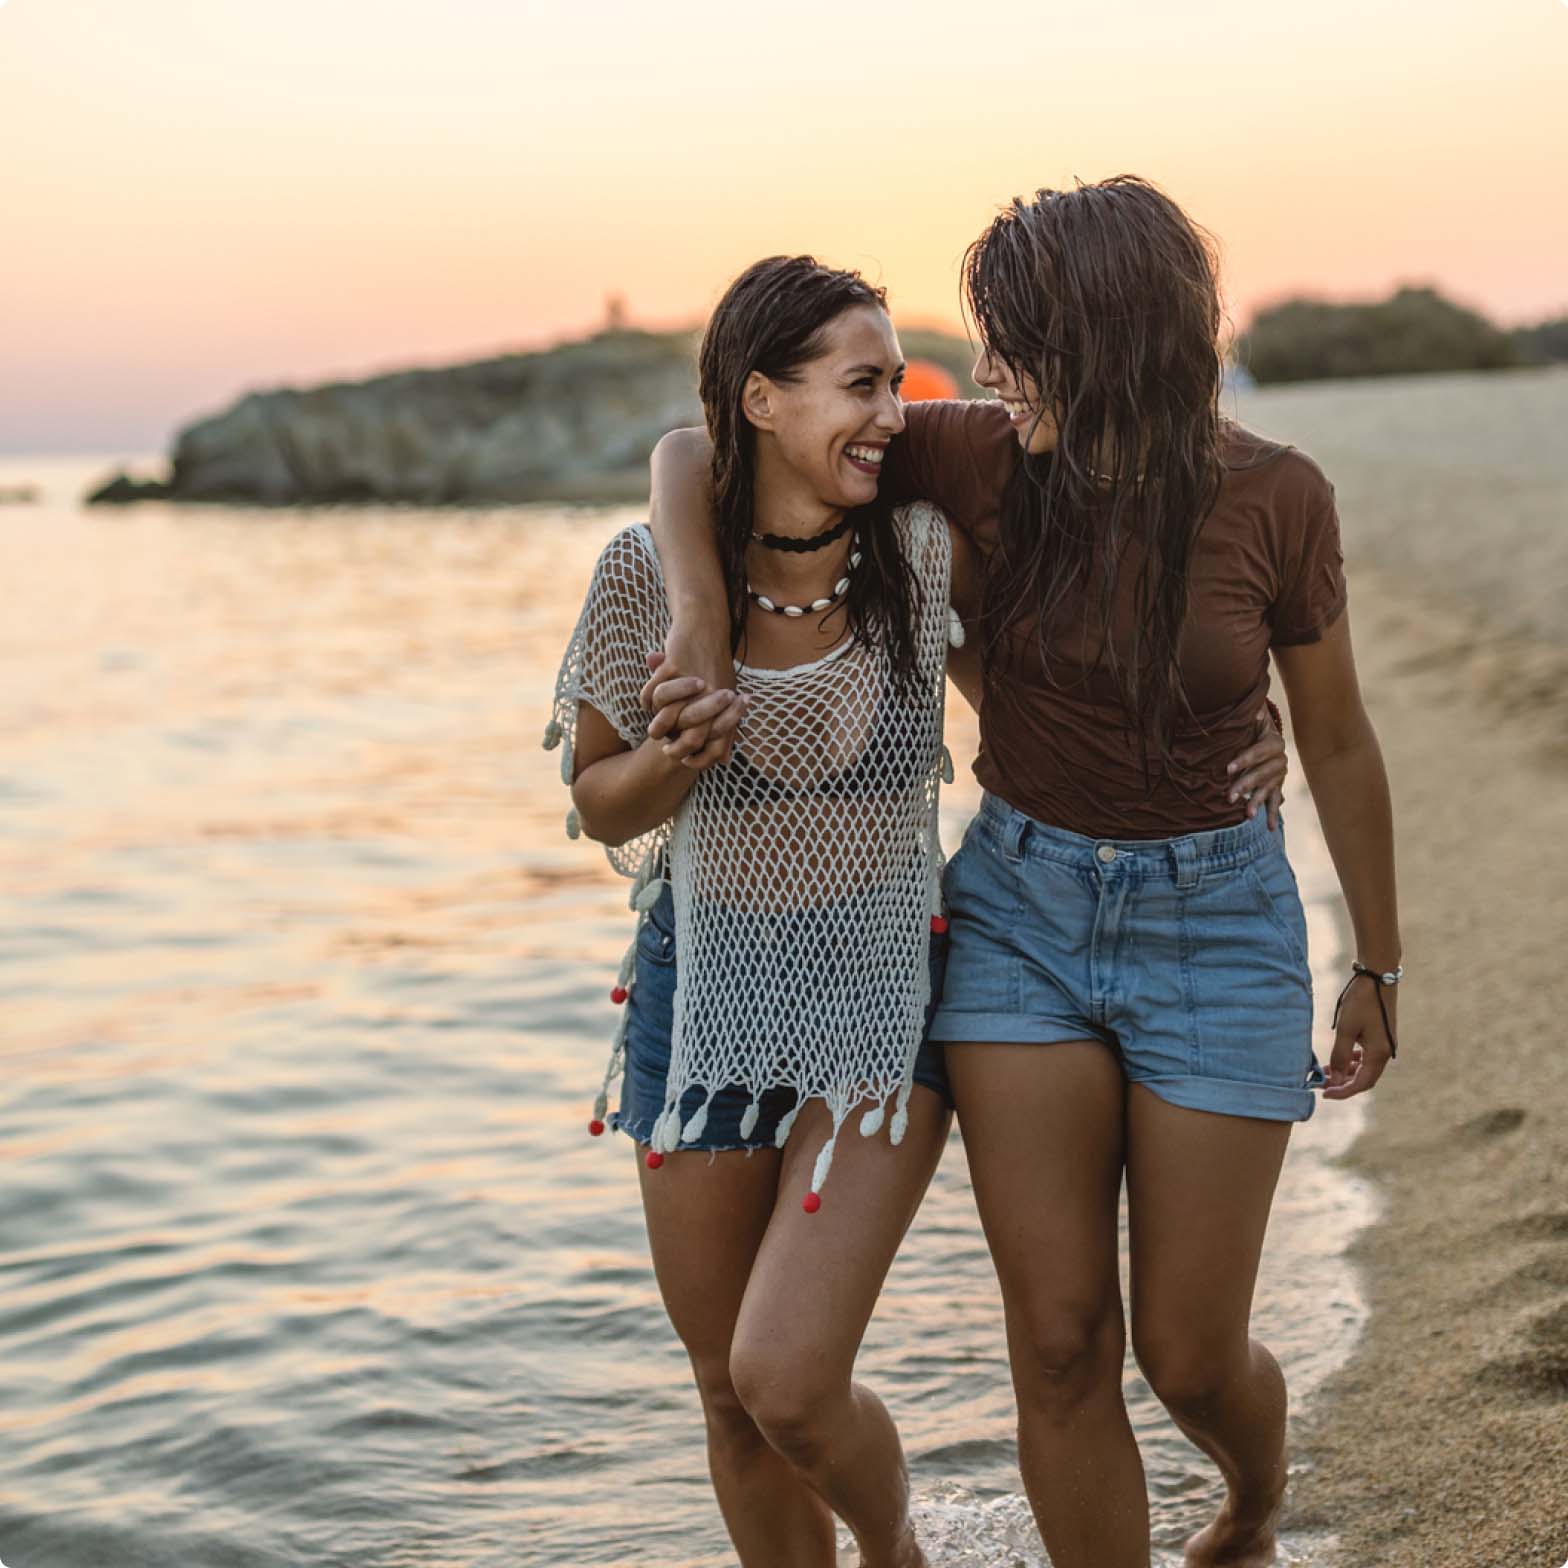 Two women holding each other and smiling while walking along the beach